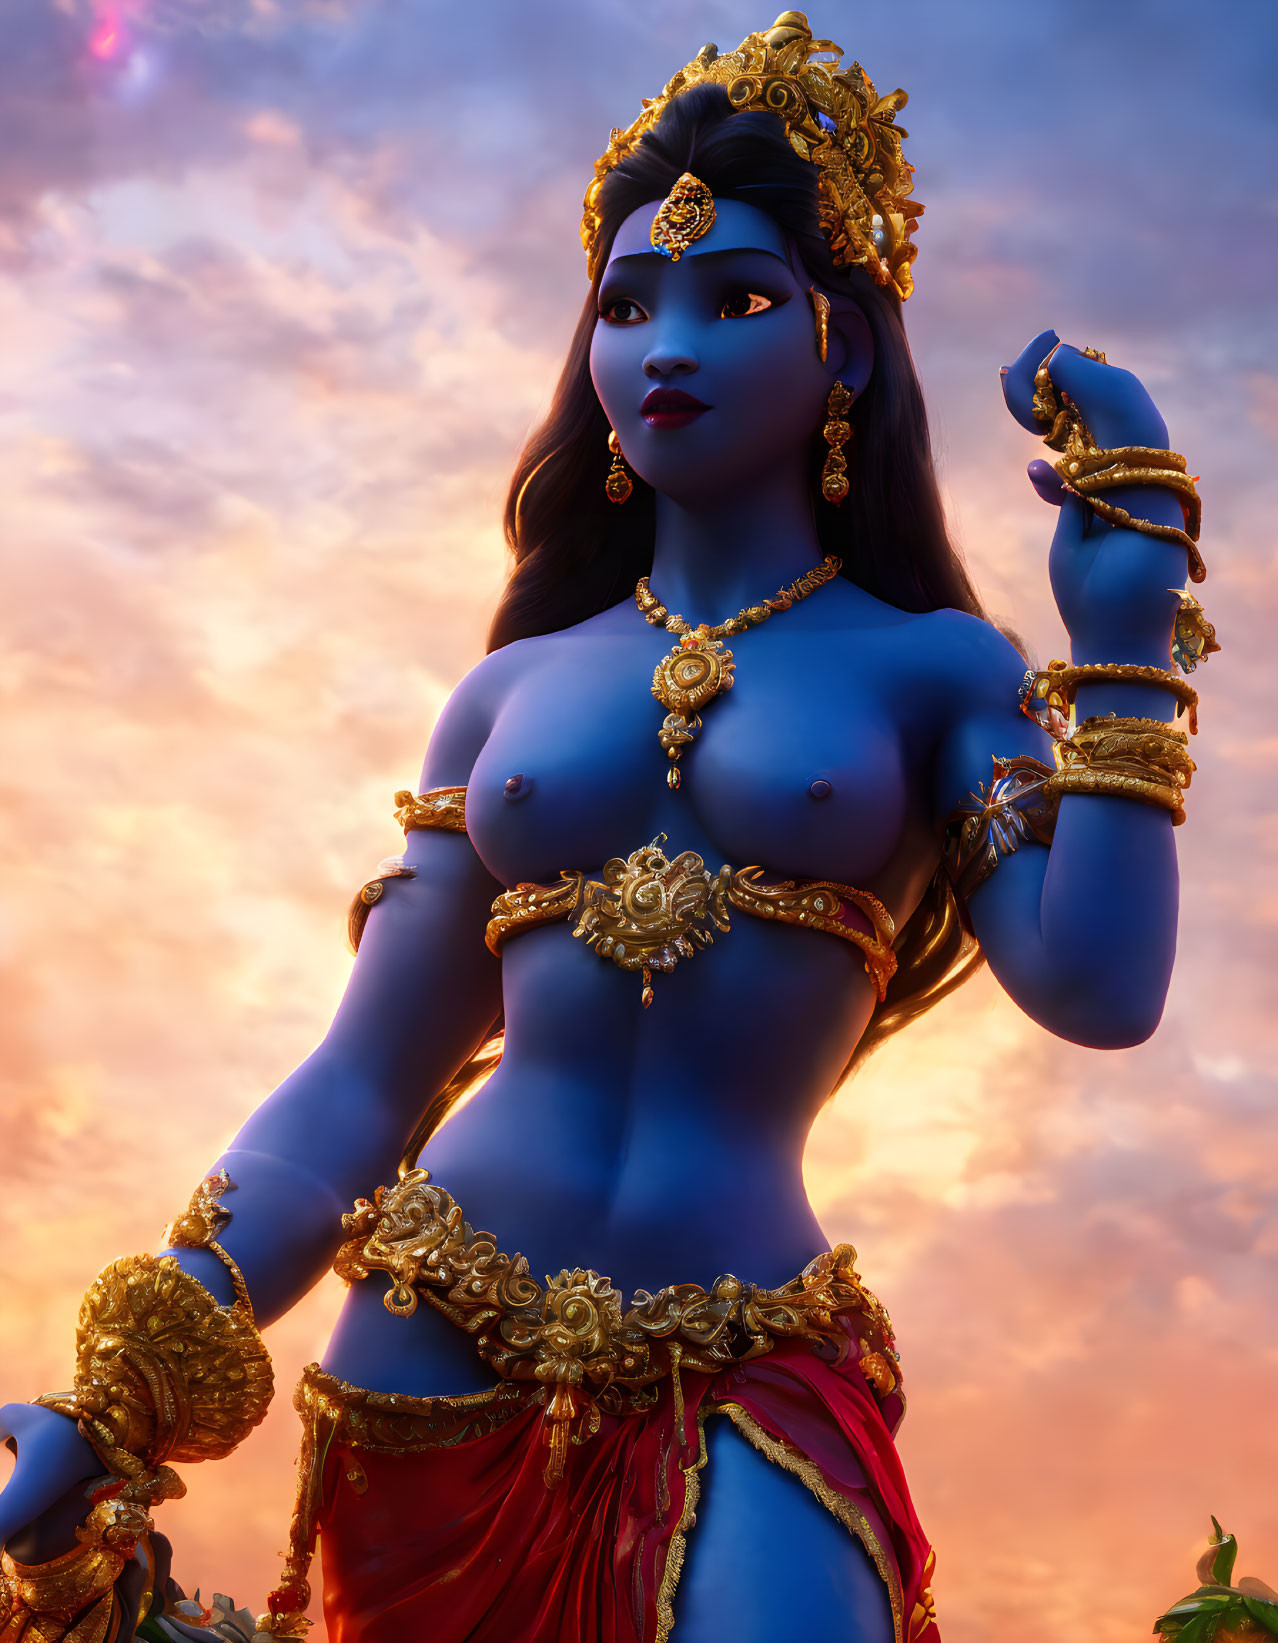 Blue-Skinned Woman with Four Arms in Golden Jewelry and Red Clothing at Sunset